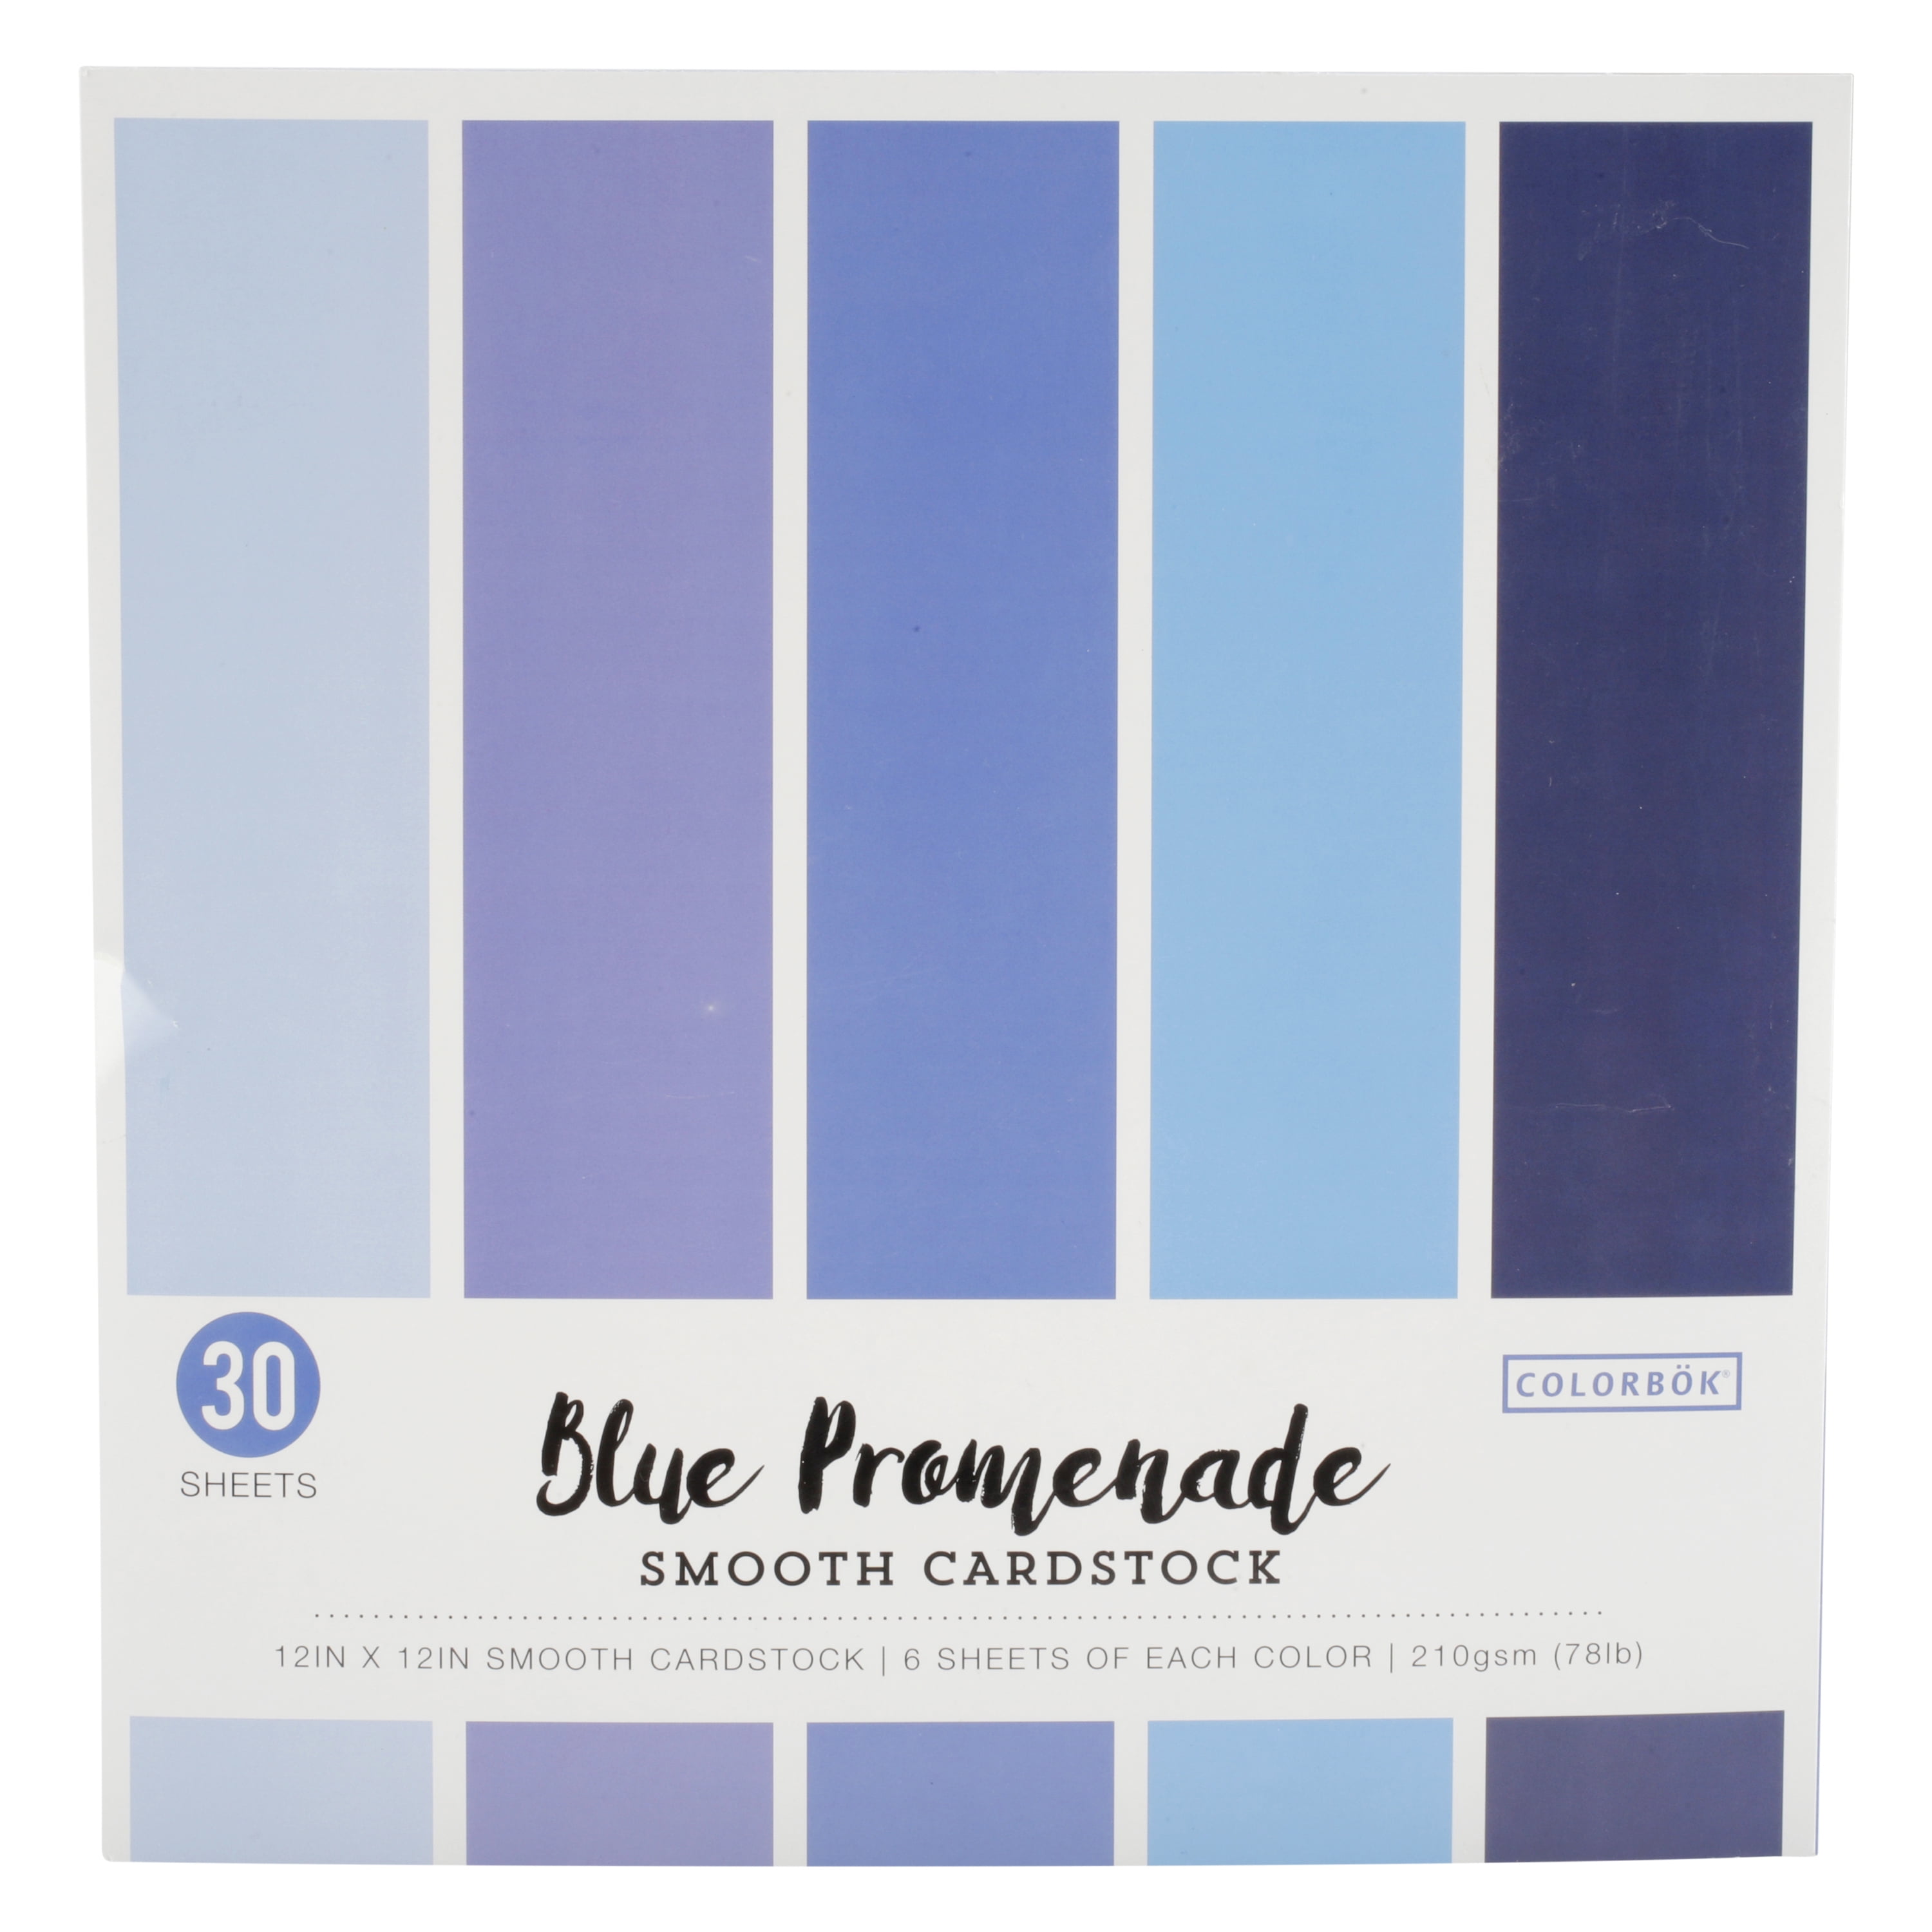 Colorbok 12" Blue Promenade Smooth Cardstock Paper, 30 Sheets